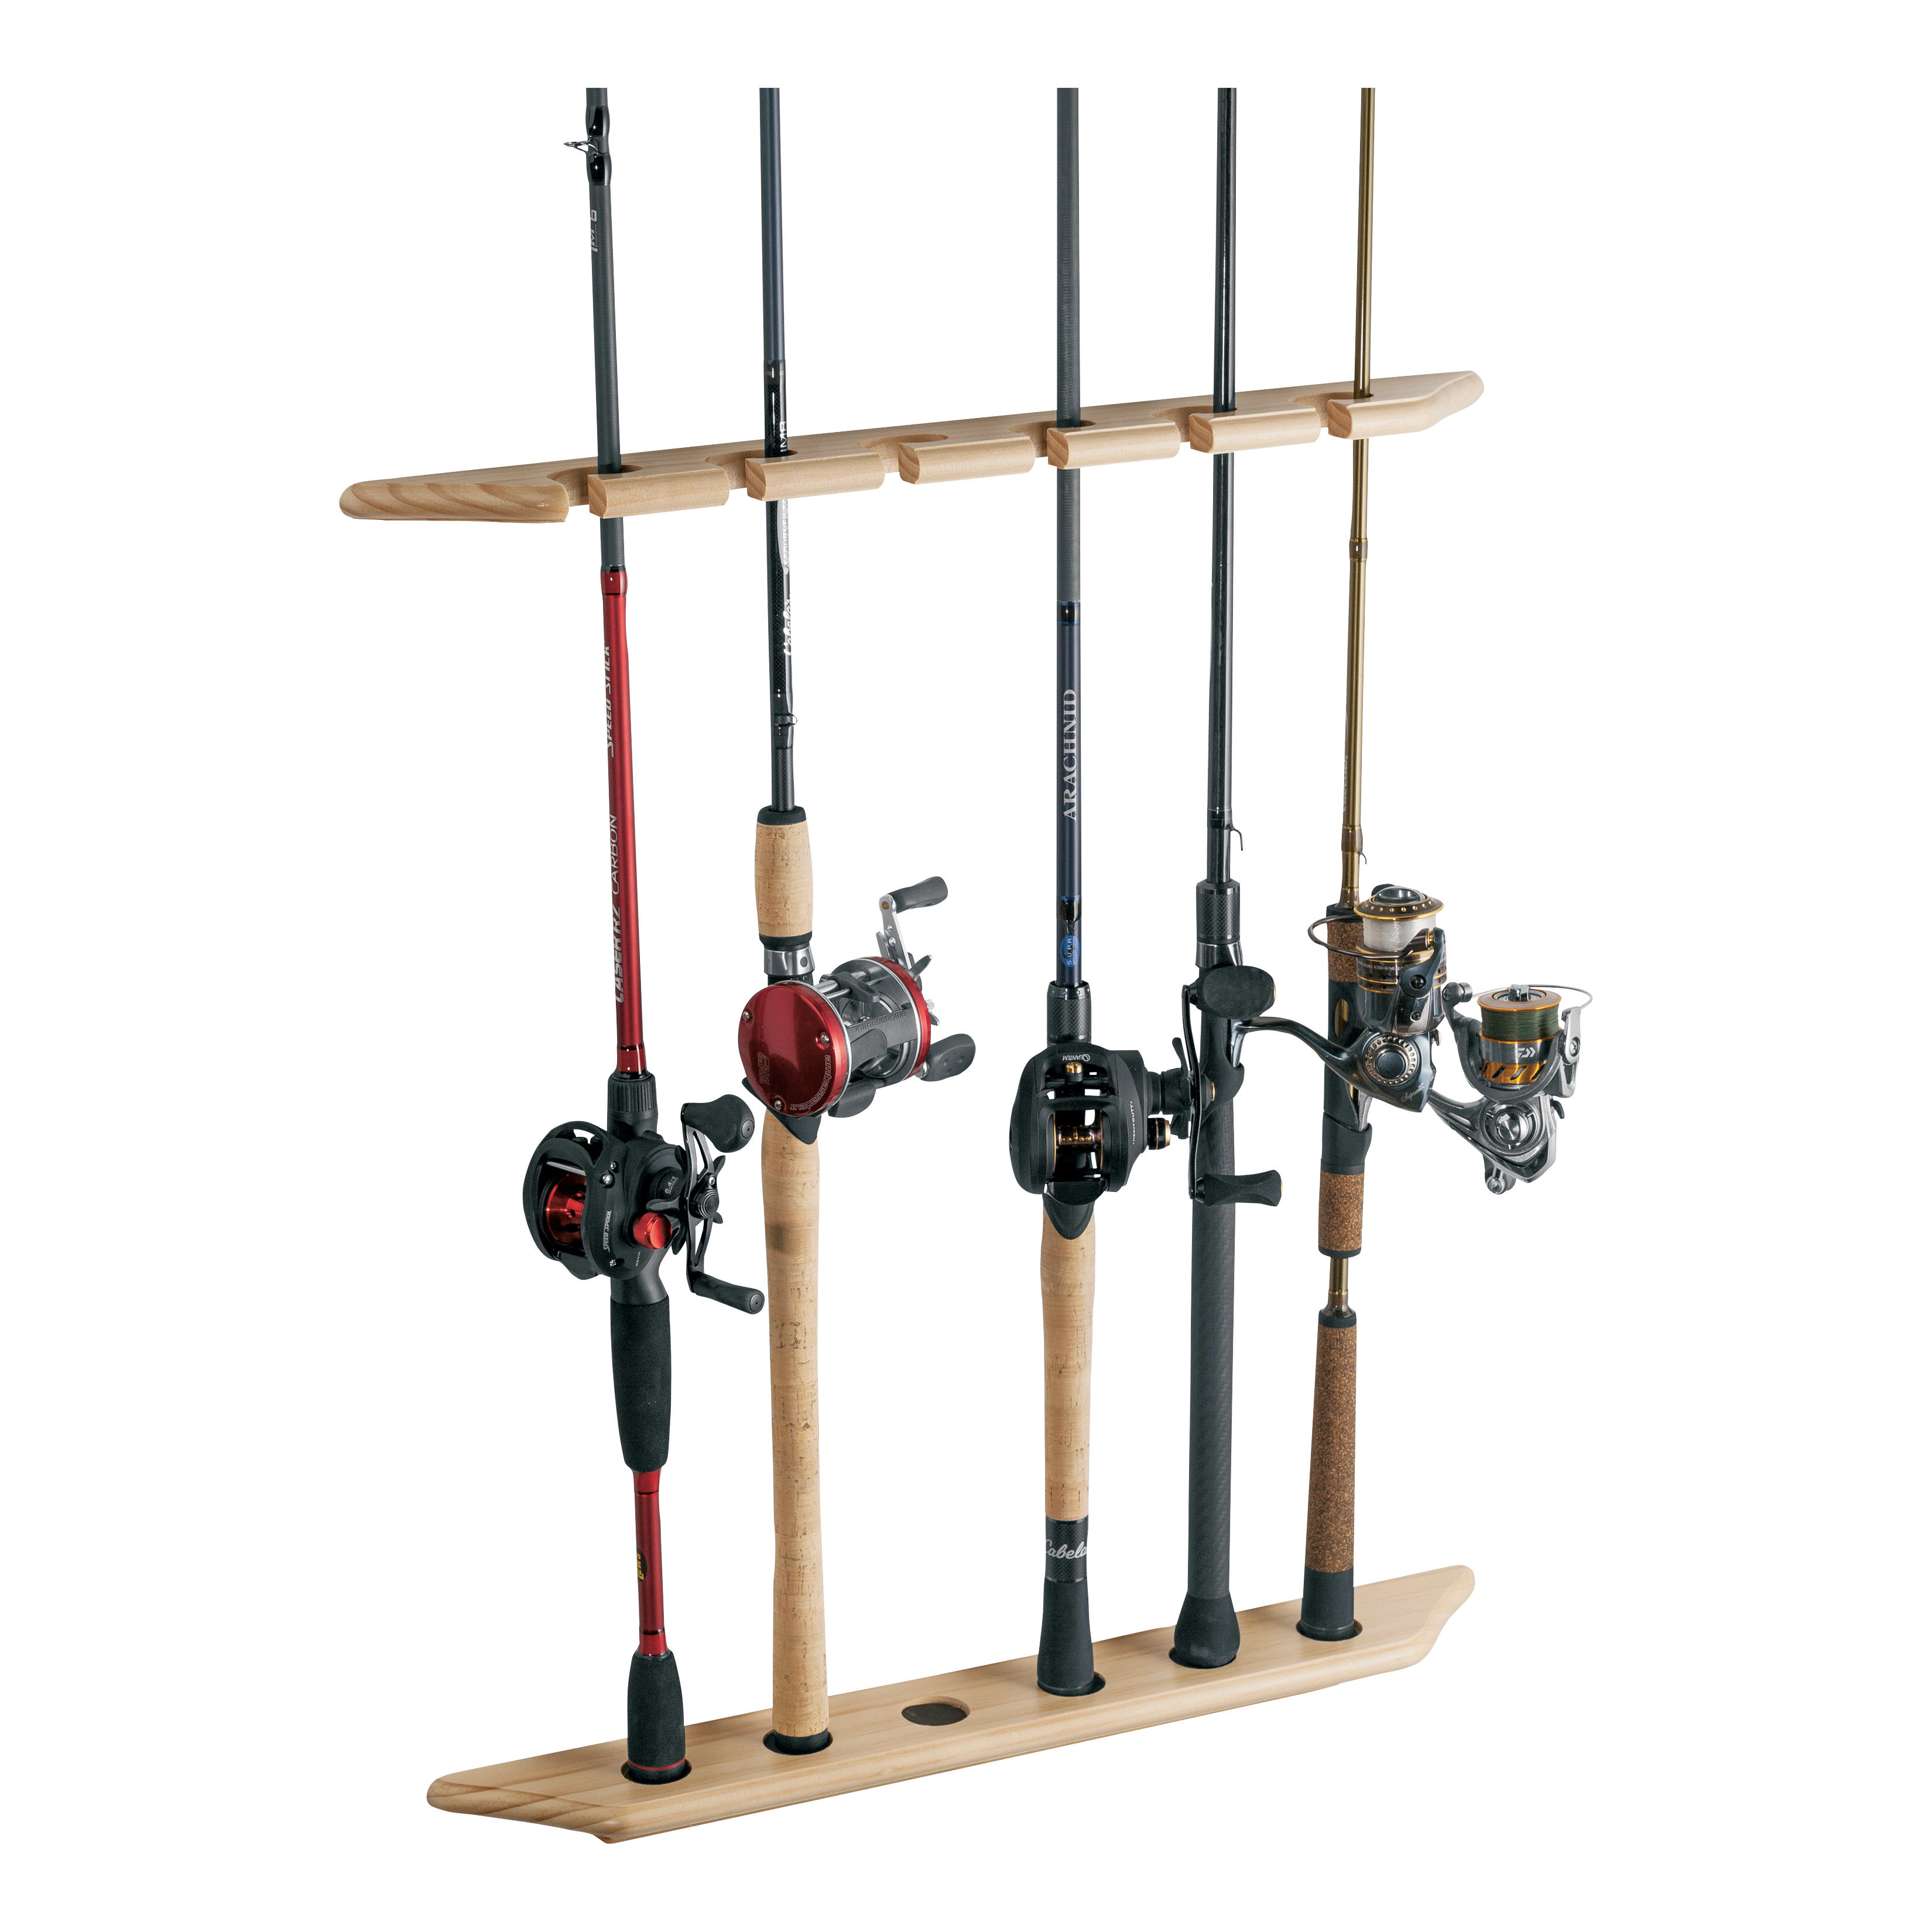 KSWLOR Fishing Rod Holder Wall Mount Rod Holders for Fishing,Fishing Pole  Wall Storage Rack,Fishing Rod Rack Storage Wall Mount for Garage,Cabin and